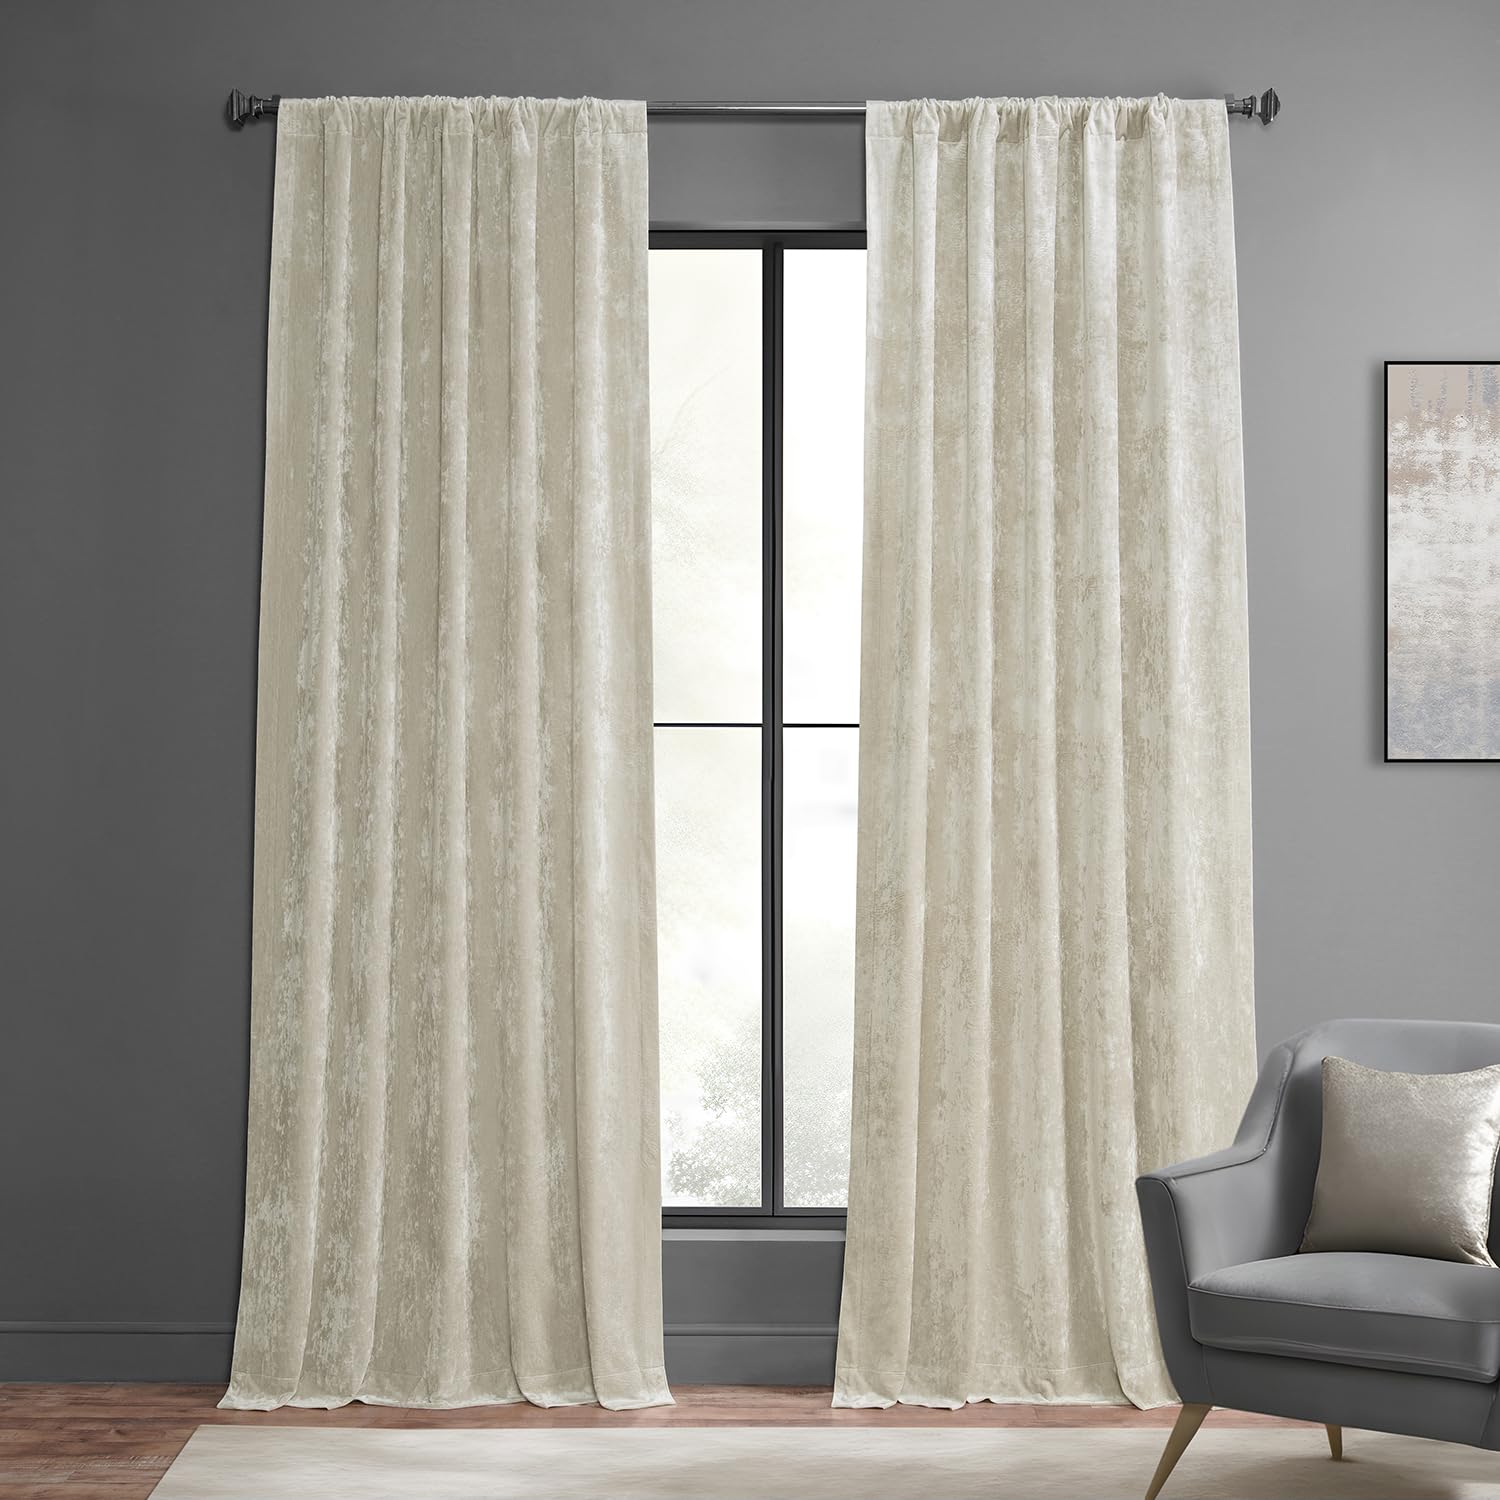 HPD Half Price Drapes Lush Crush Velvet Curtains - Room Darkening Curtain 84 Inches Long for Bedroom & Living Room, Luxury Look, Rod Pocket Design, (1 Panel), 50W x 84L, Champagne